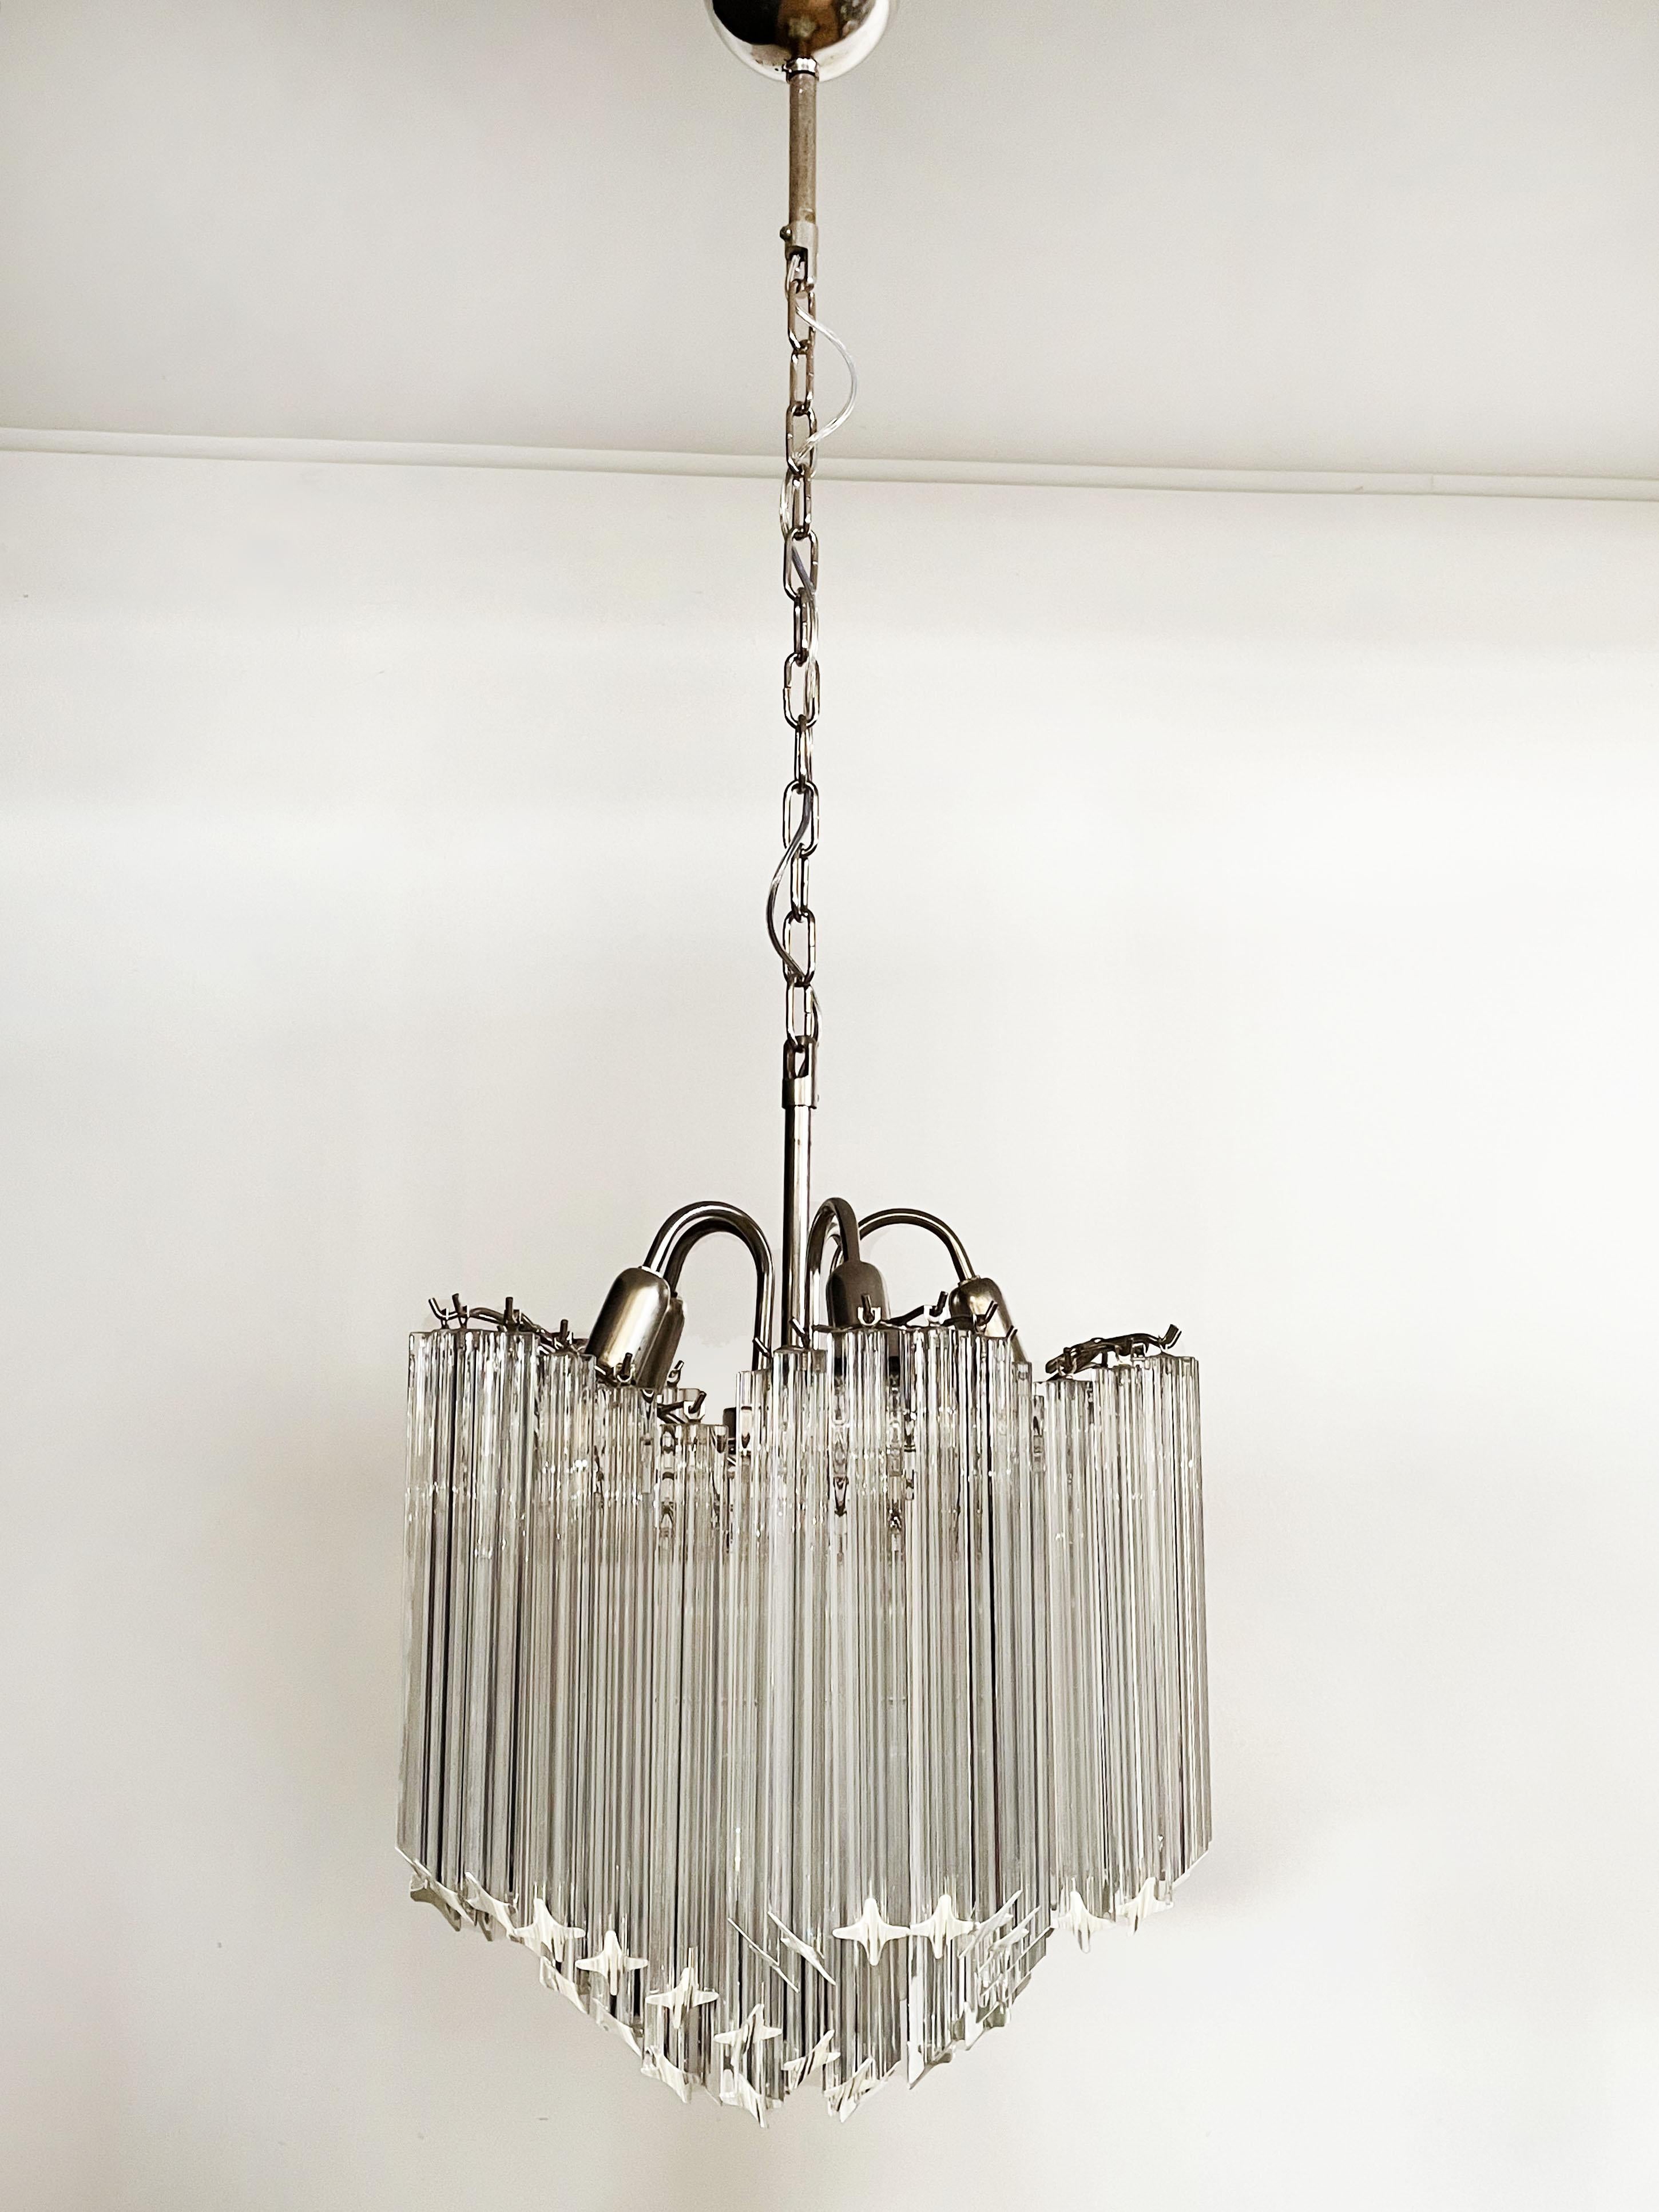 A magnificent Murano glass unique chandelier, spiral shape, very elegant, 60 trasparent quadriedri on nickel metal frame. This Mid-Century Italian chandelier is truly a timeless classic.
Period: late xx century
Dimensions: 46,50inches (120 cm)